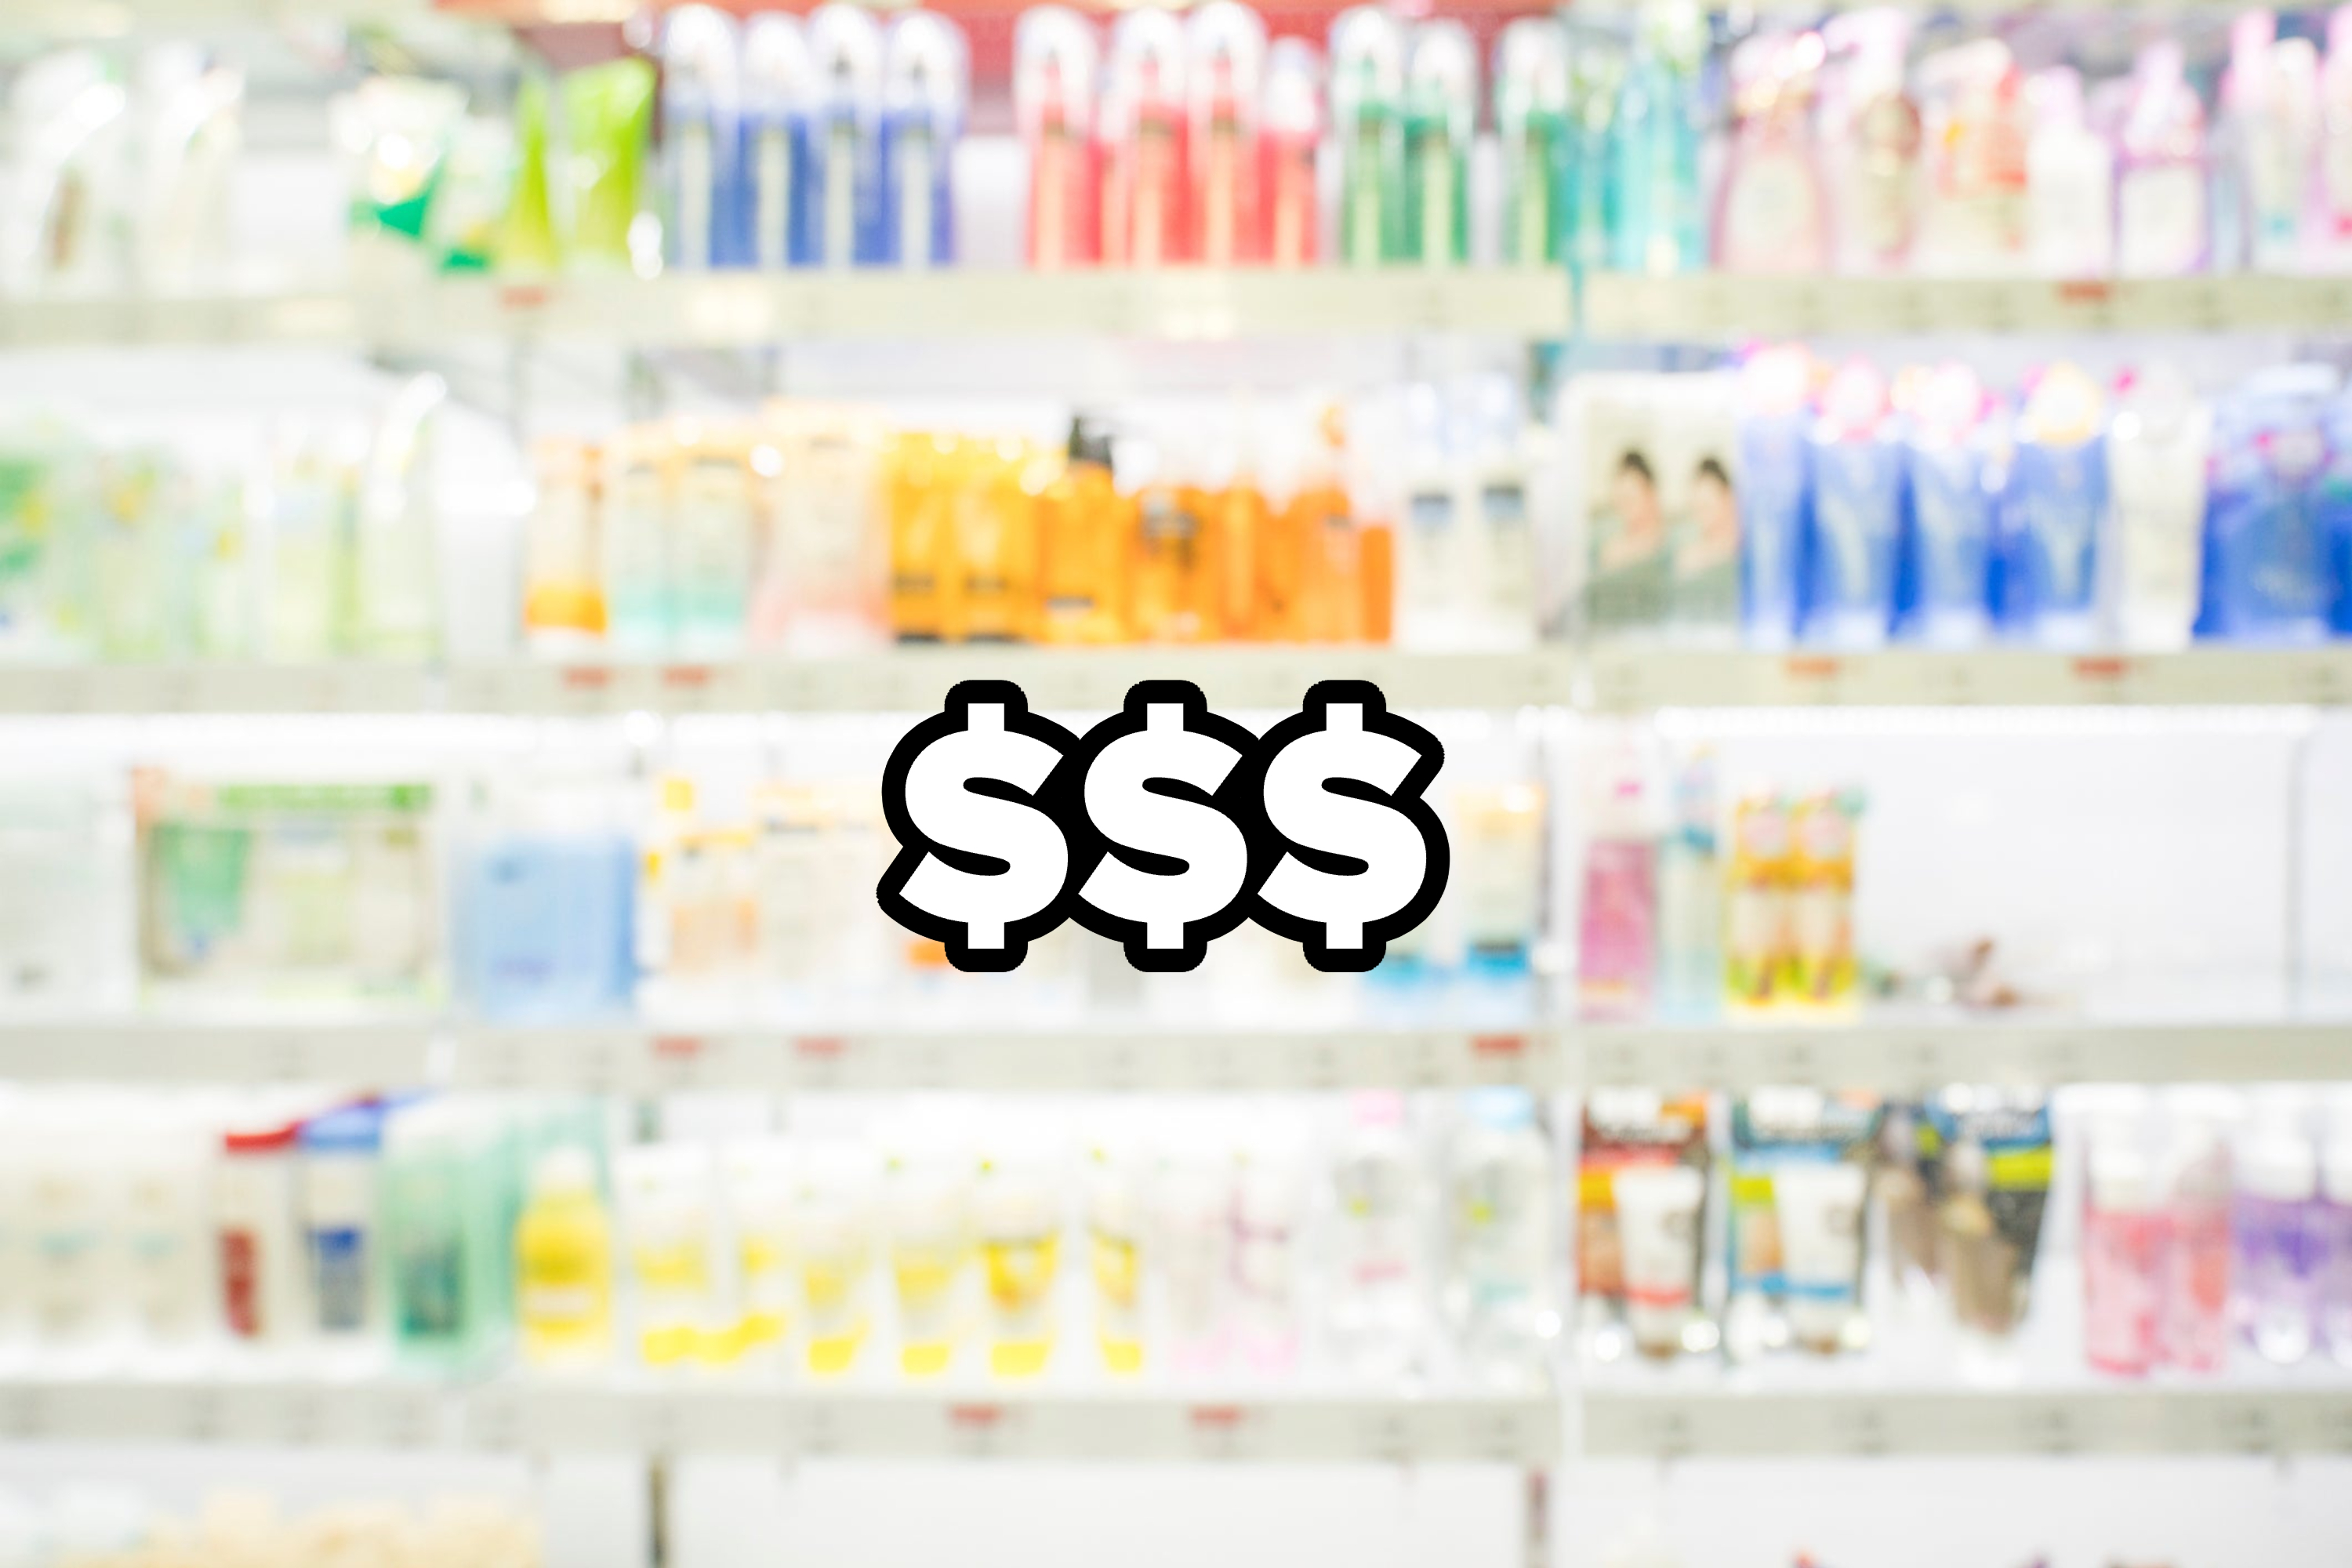 &quot;$$$&quot; over an image of skincare products on a shelf